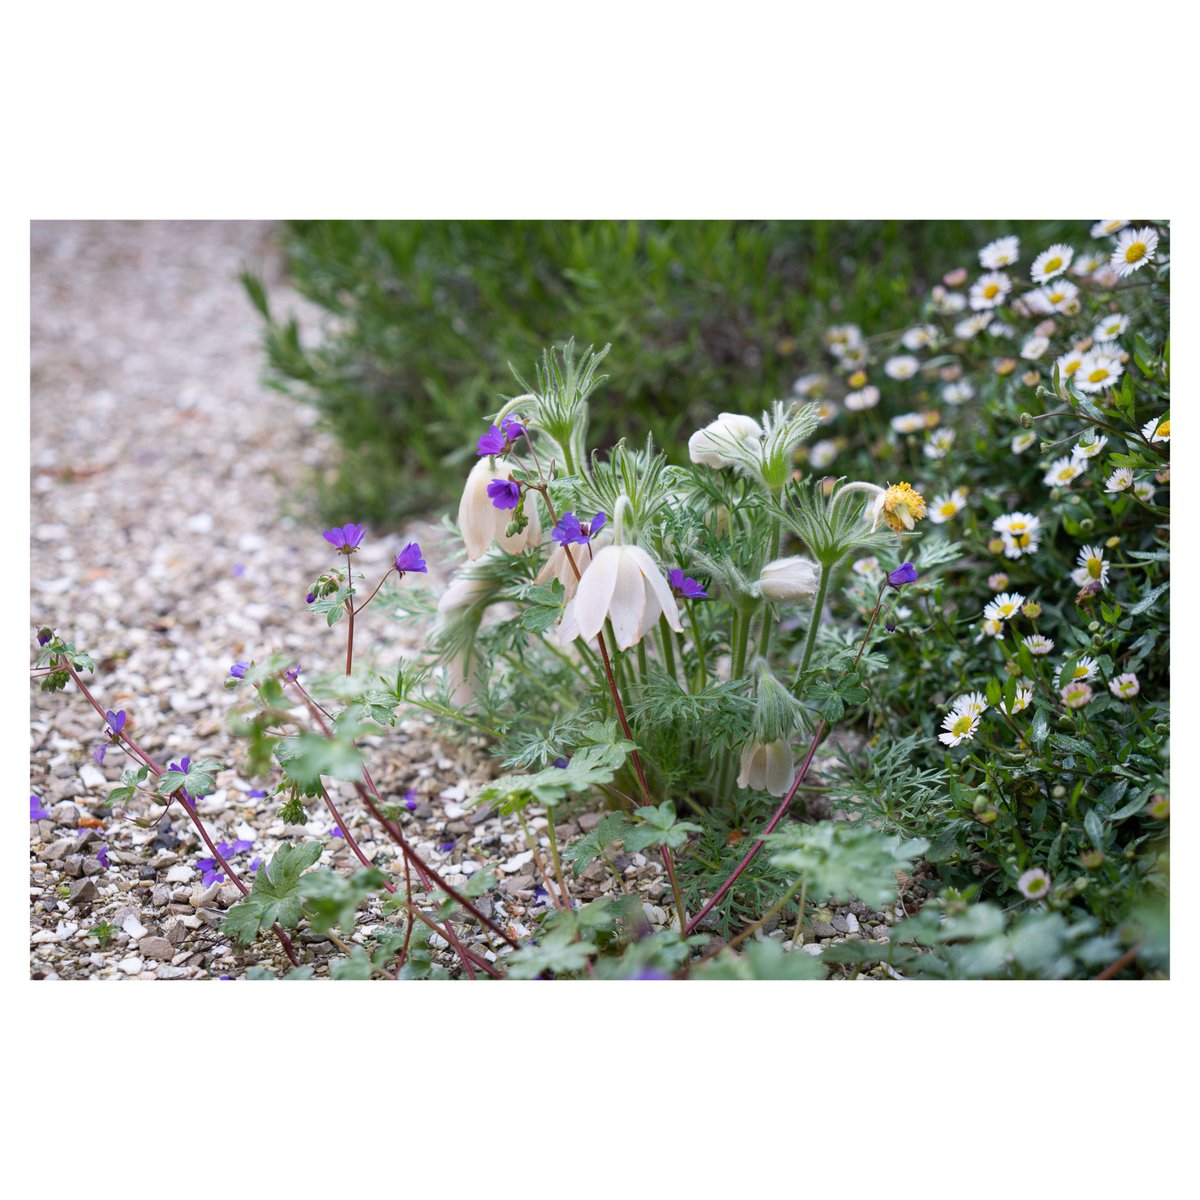 Good job we love Geranium 'Bill Wallis', he's self sown all over the garden this year in the borders and in the gravel mingling with the Erigeron and Pulsatilla. 
.
.
.
.
.
#geraniumbillwallis #selfsown #selfseeders #gravelgarden #inthegarden #erigeron #pulsatilla #plantingdesign